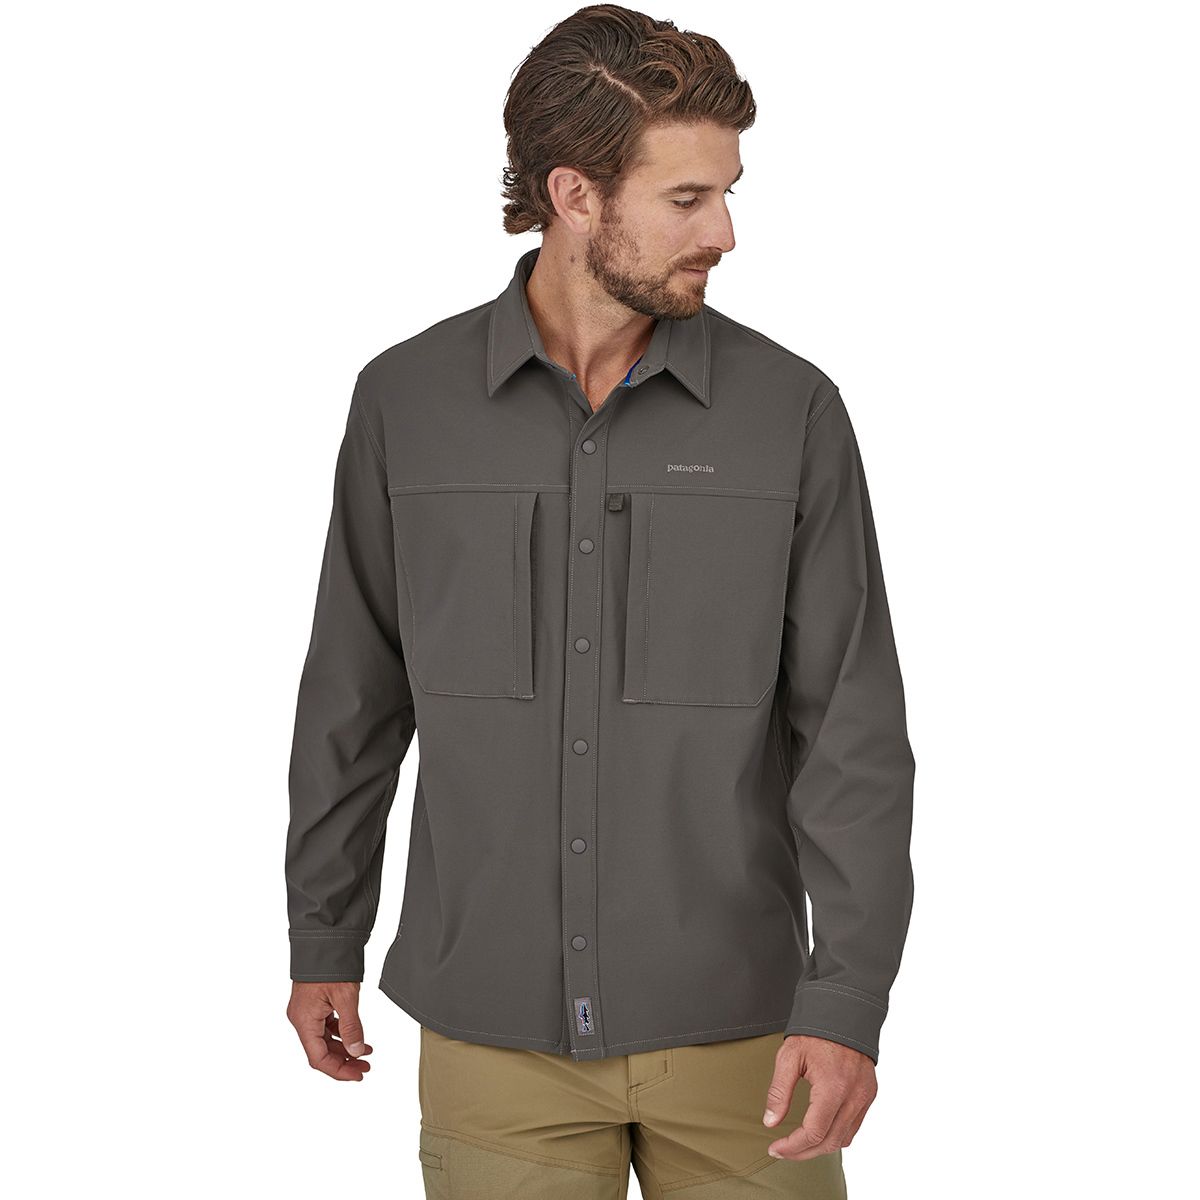 Explore the Outdoors with the Patagonia Snap-Dry Long-Sleeve Shirt